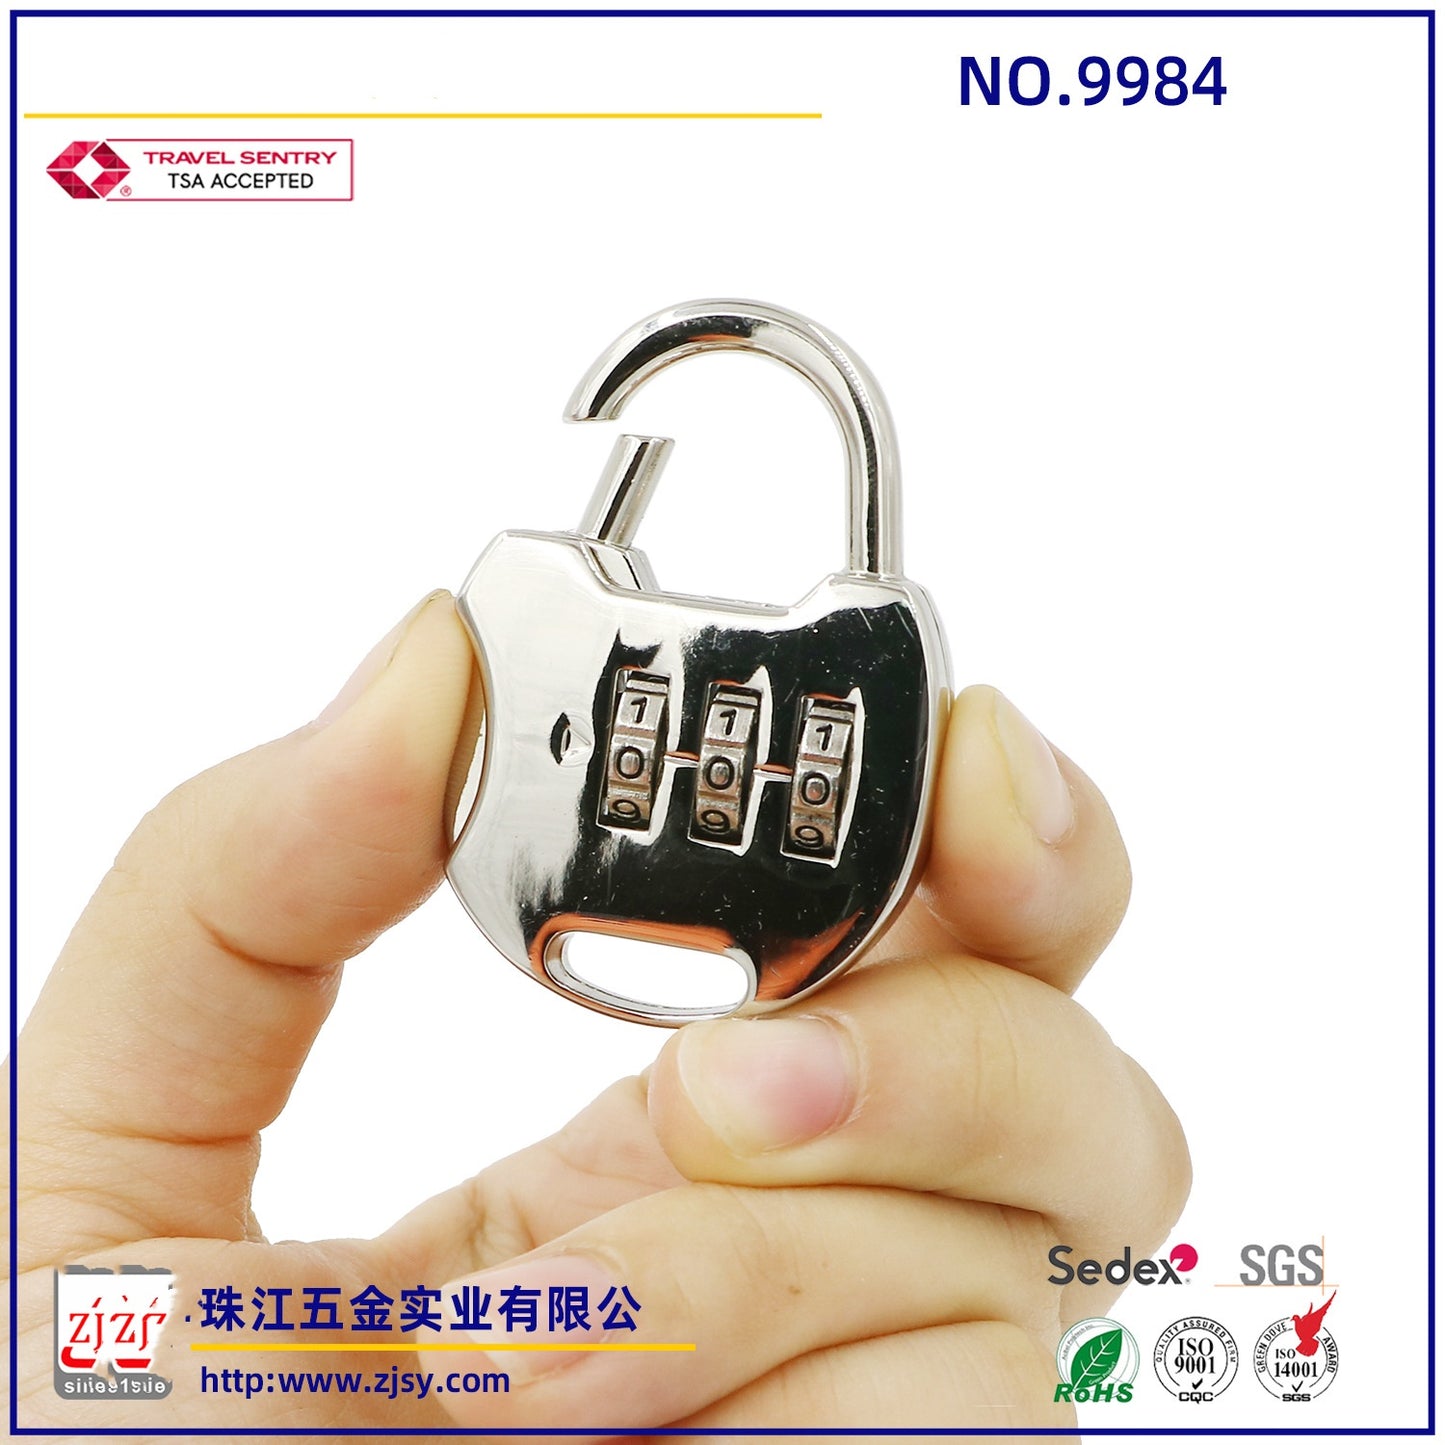 the latest design of 3 digit code zipper plastic lock for security luggage backpack lock customs lock accessories for handbags-25